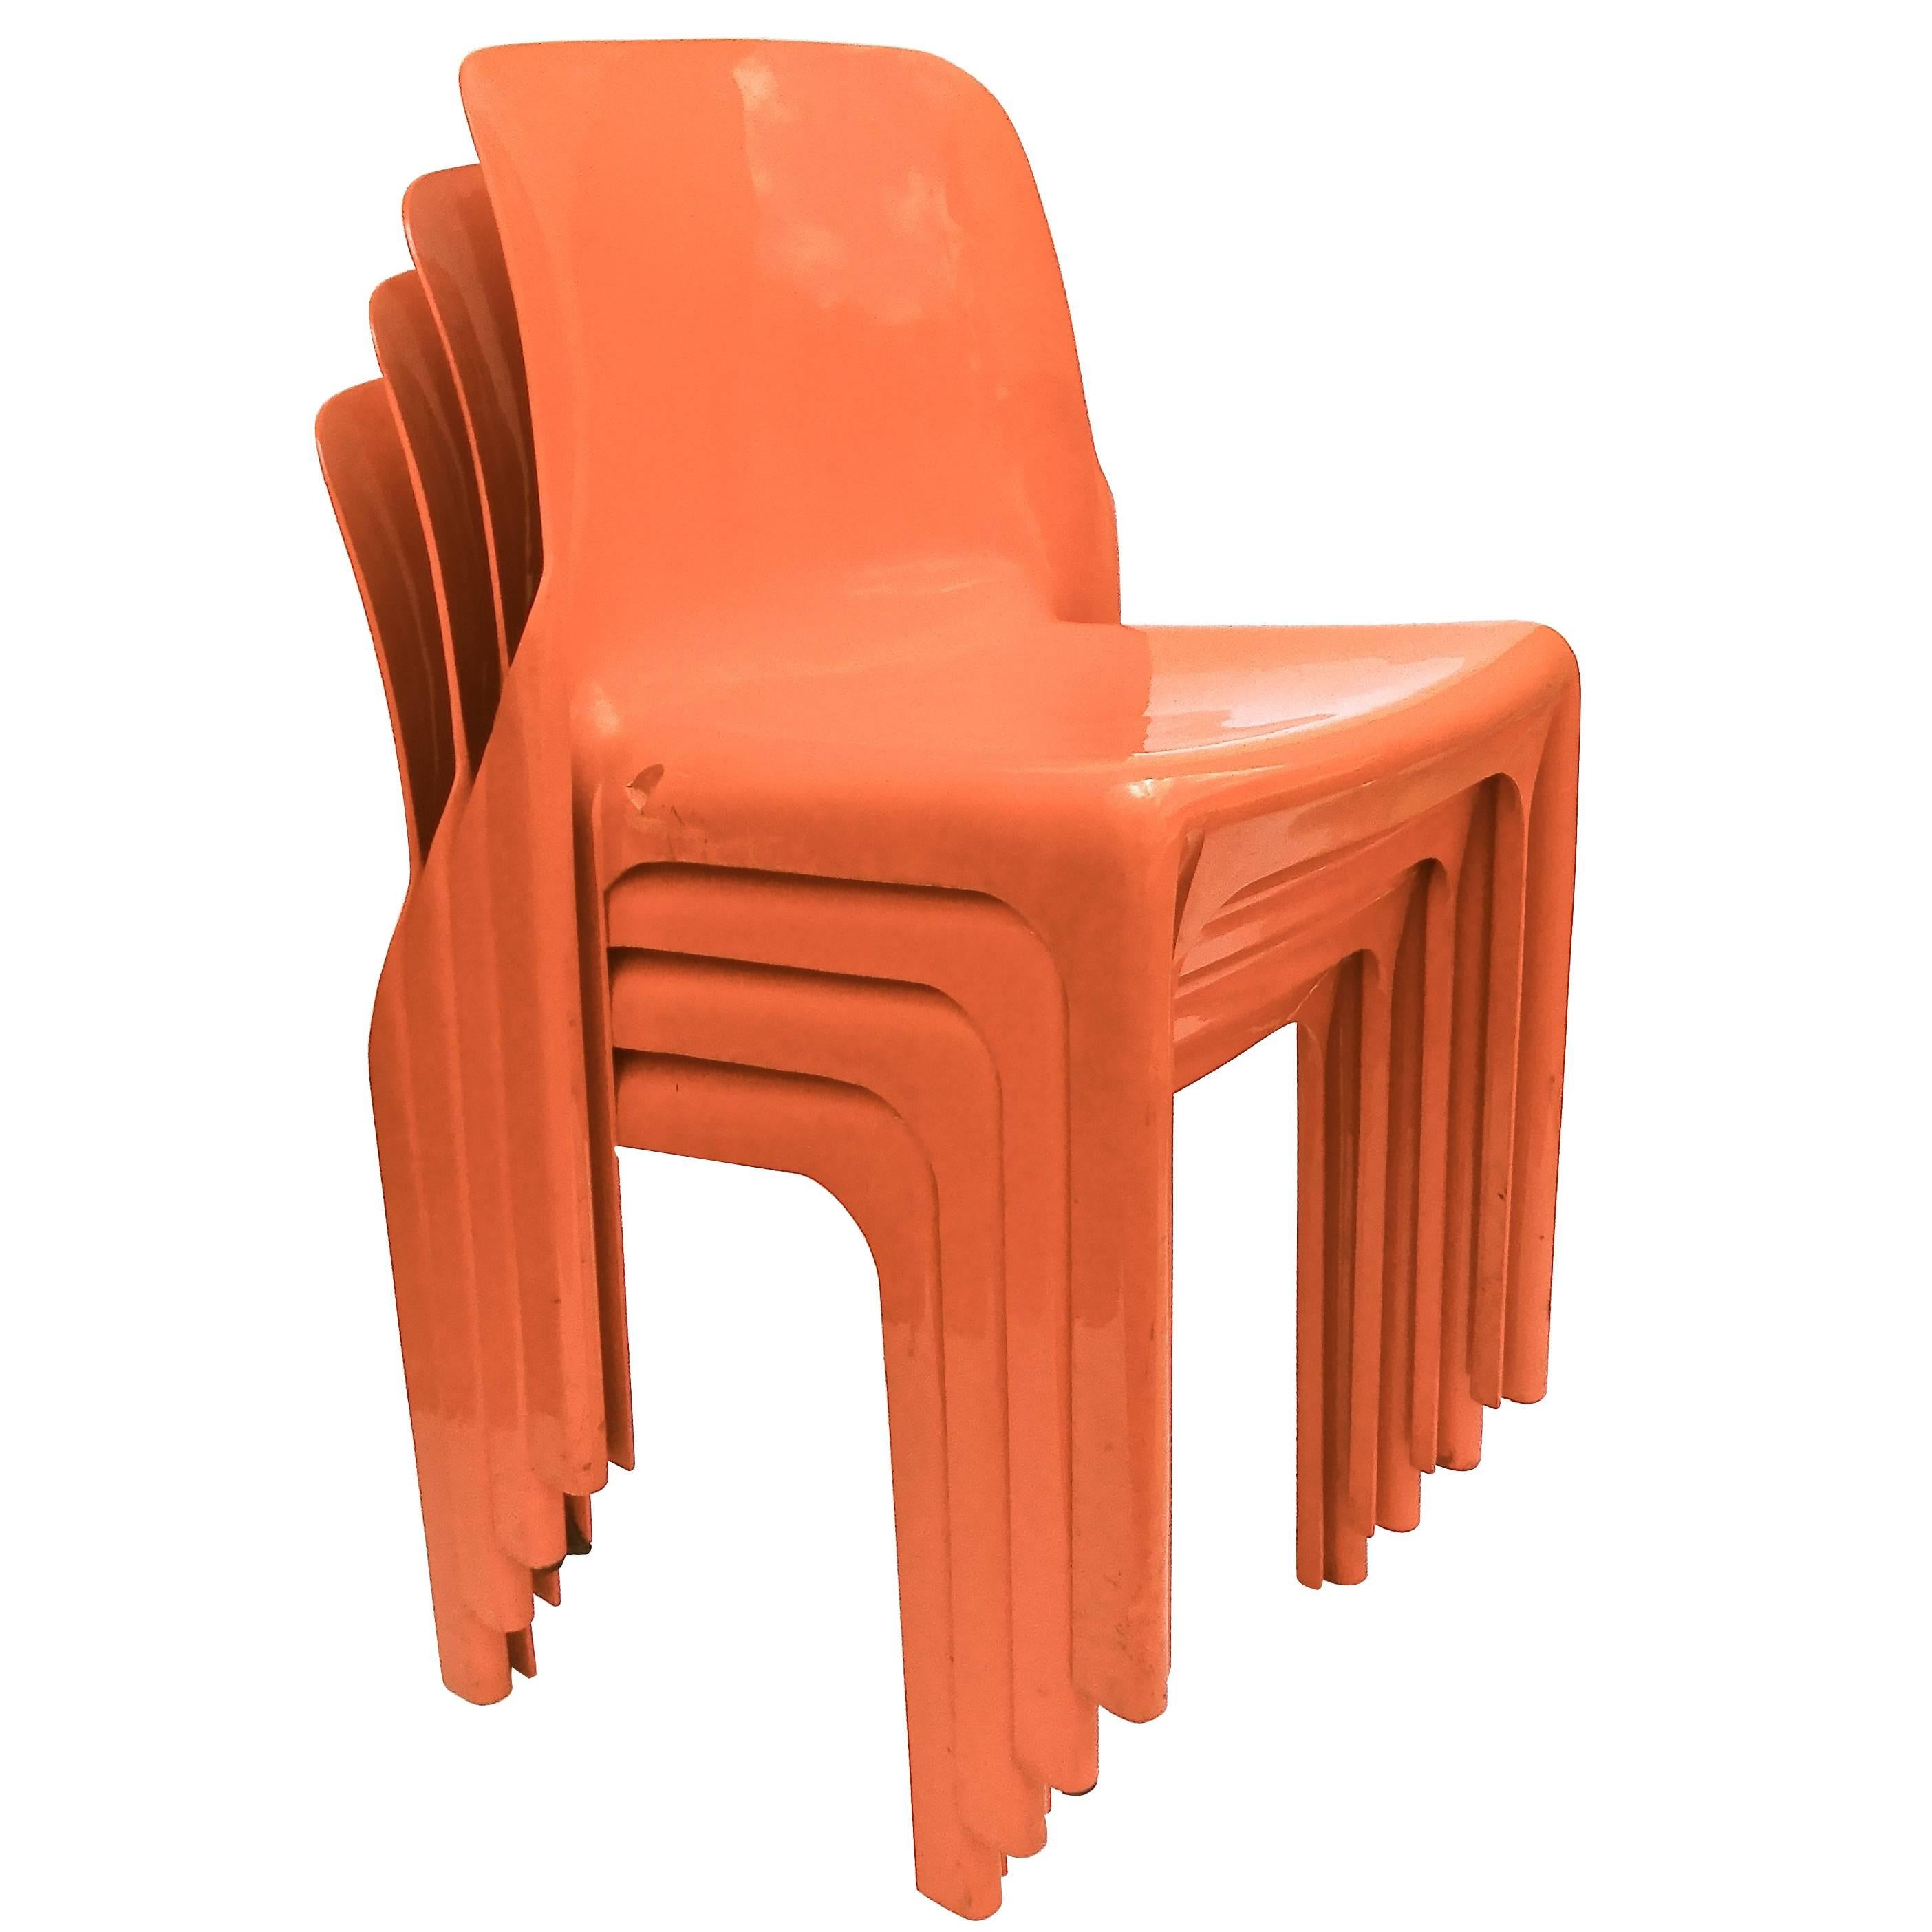 Vibrant Set of Four Vico Magistretti Italian Plastic Dining Chairs, 1970s For Sale